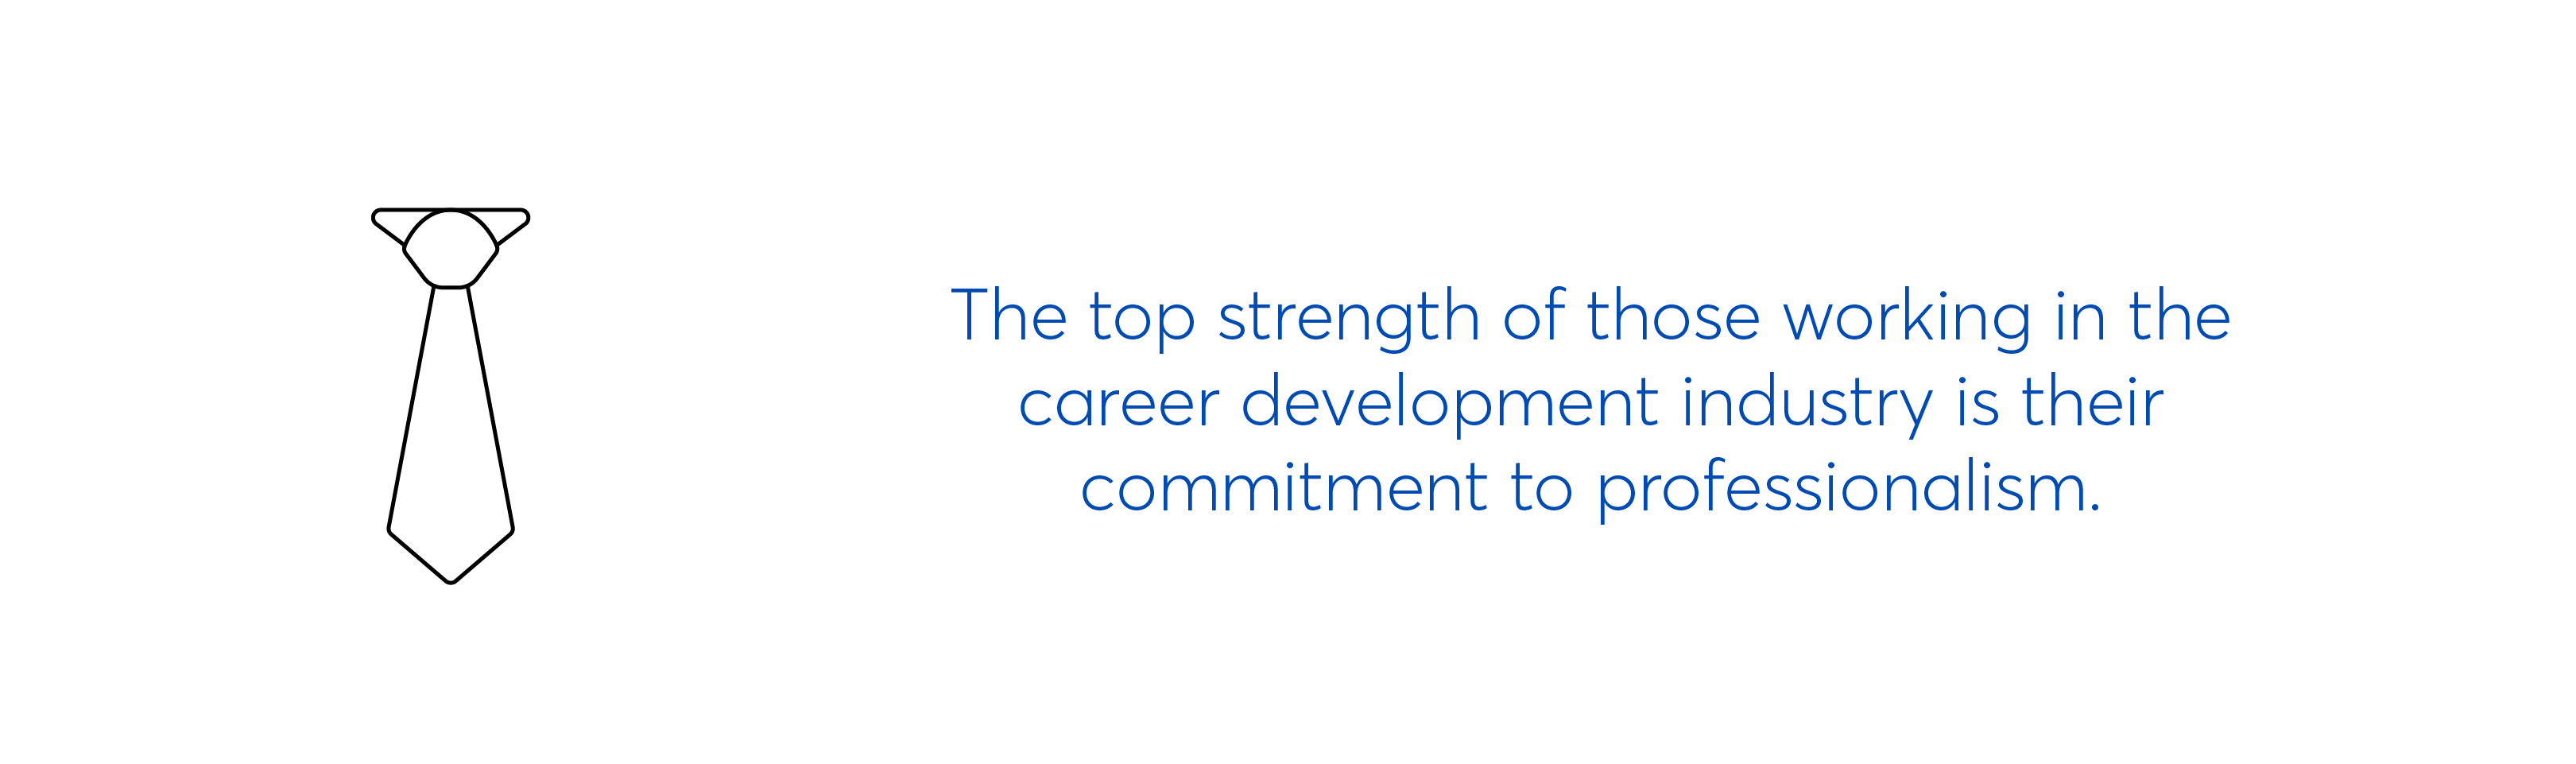 top strengths of the career development industry